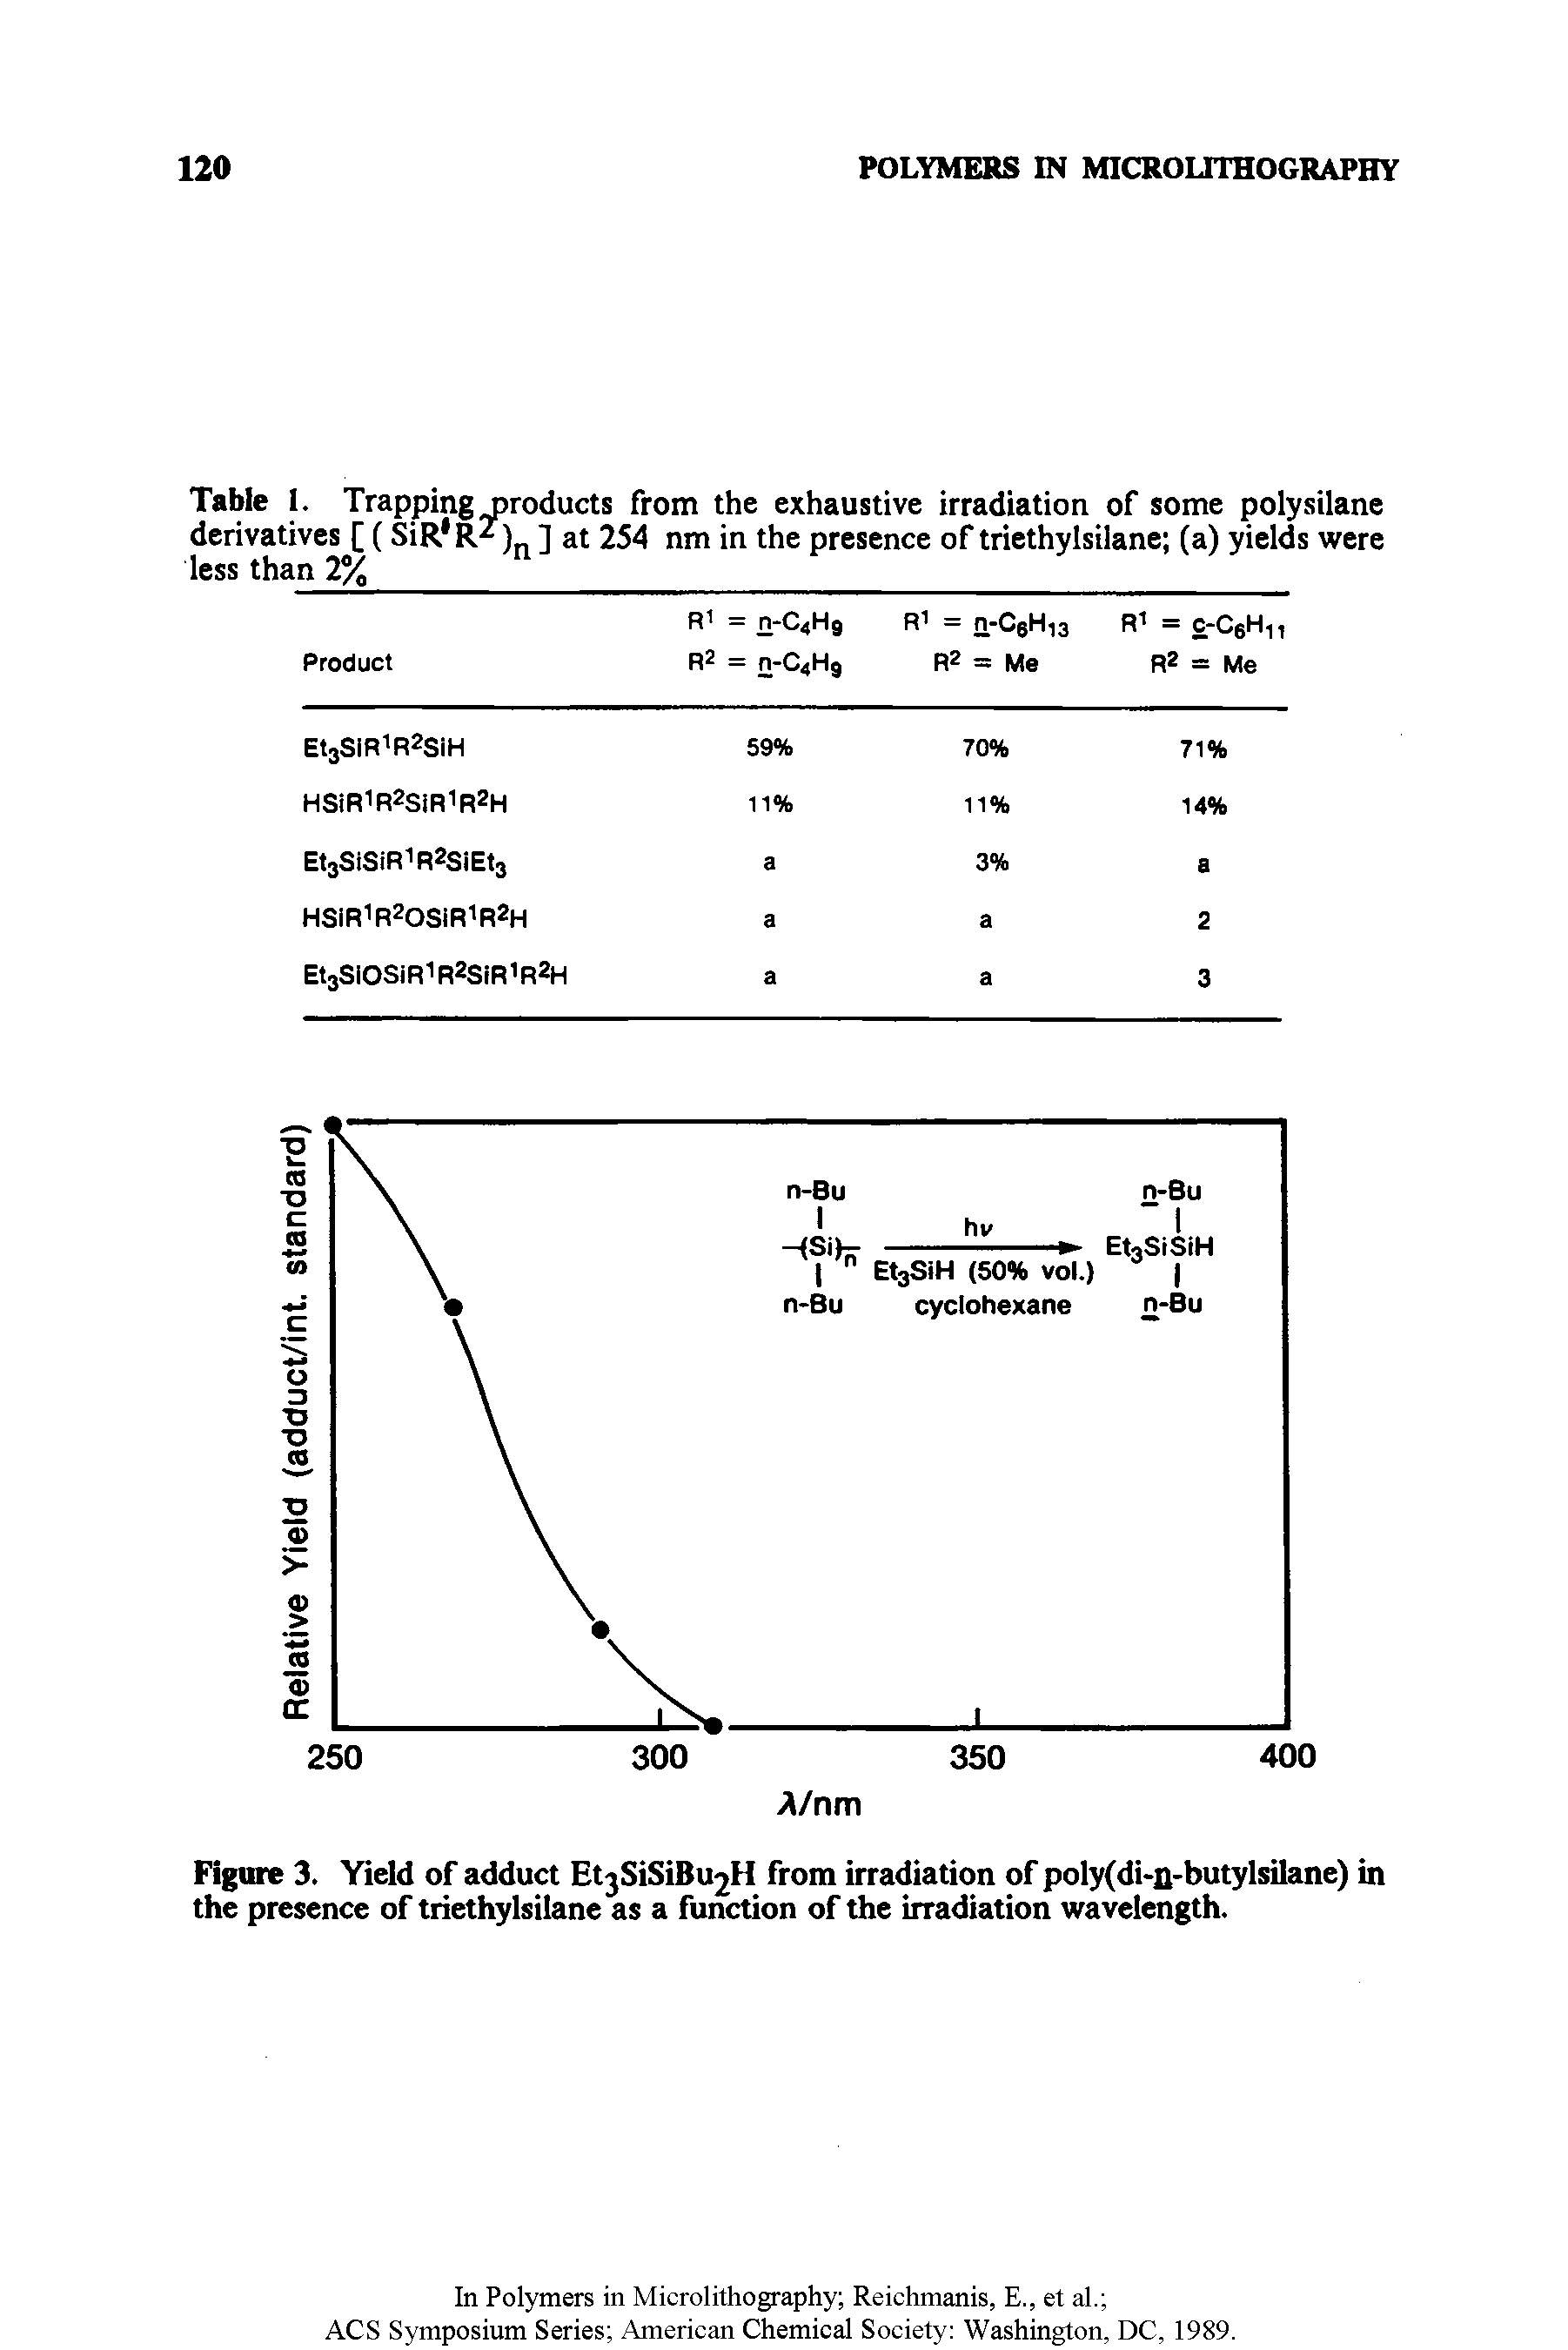 Figure 3. Yield of adduct I SiSiB H from irradiation of poly(di-n-butylsilane) in the presence of triethylsilane as a function of the irradiation wavelength.